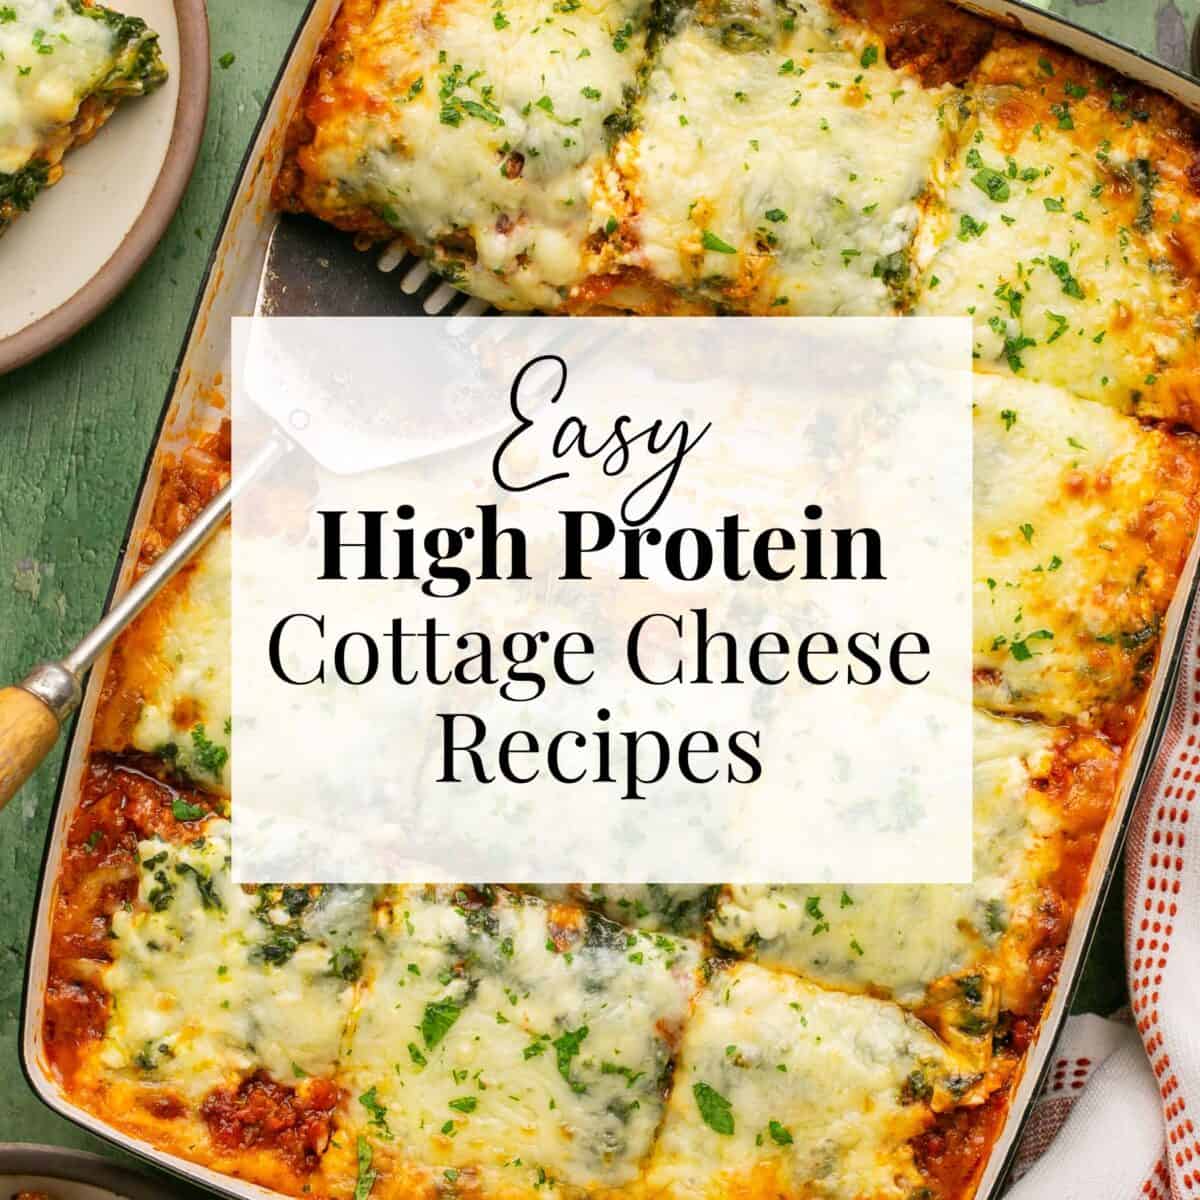 Easy high protein cottage cheese recipes photo label with lasagna in the background.